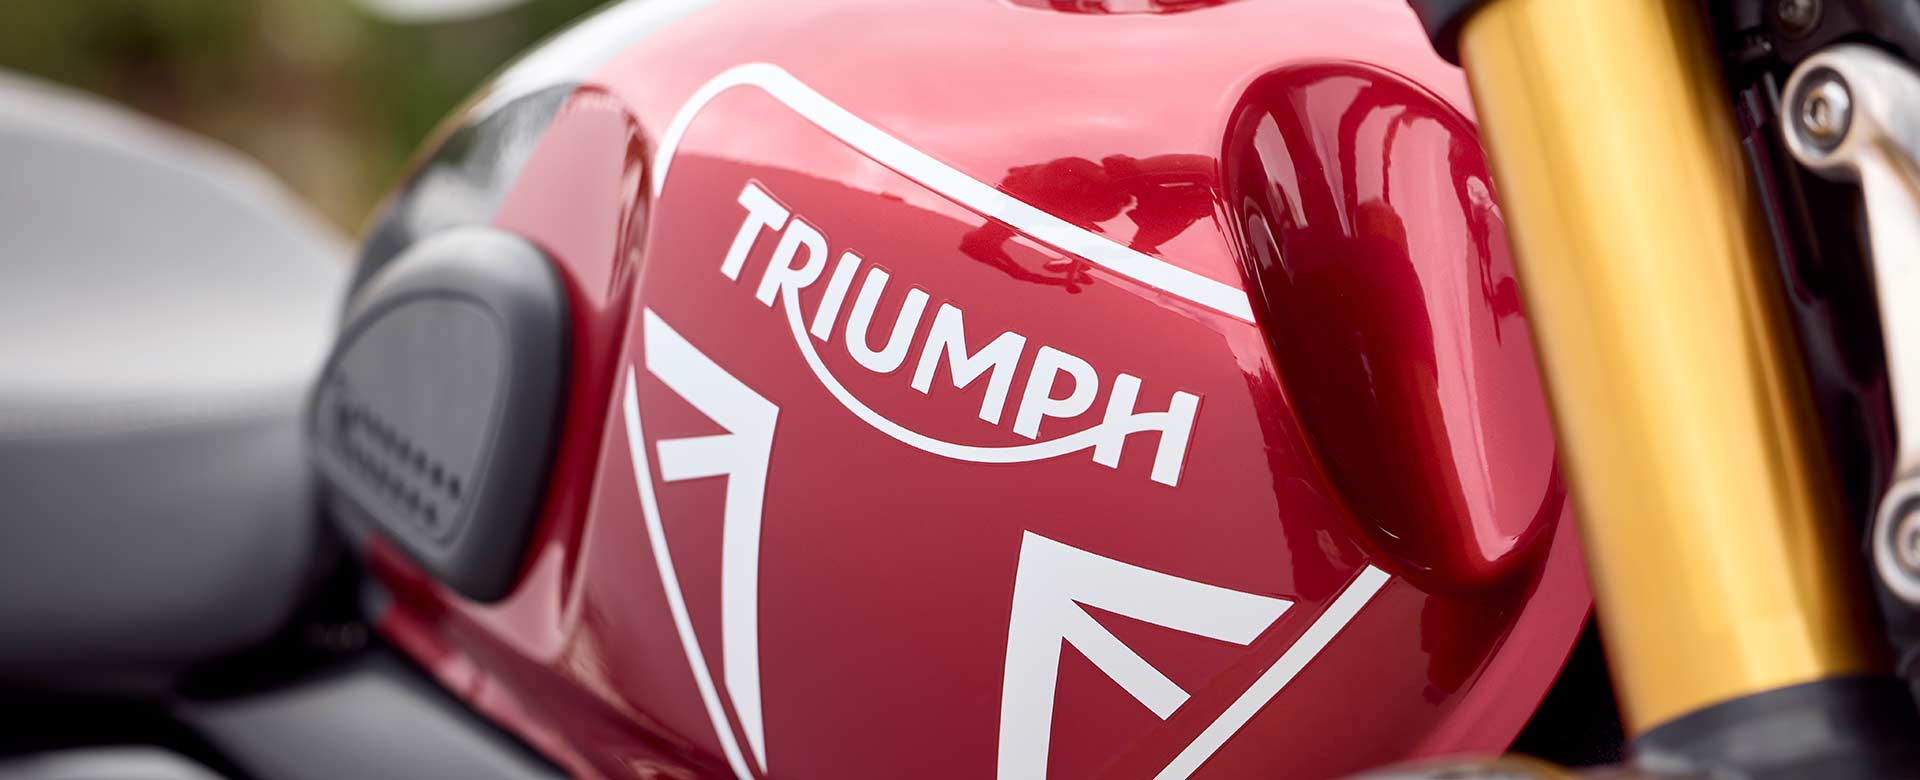 Triumph Speed 400 Carnival red tank detail